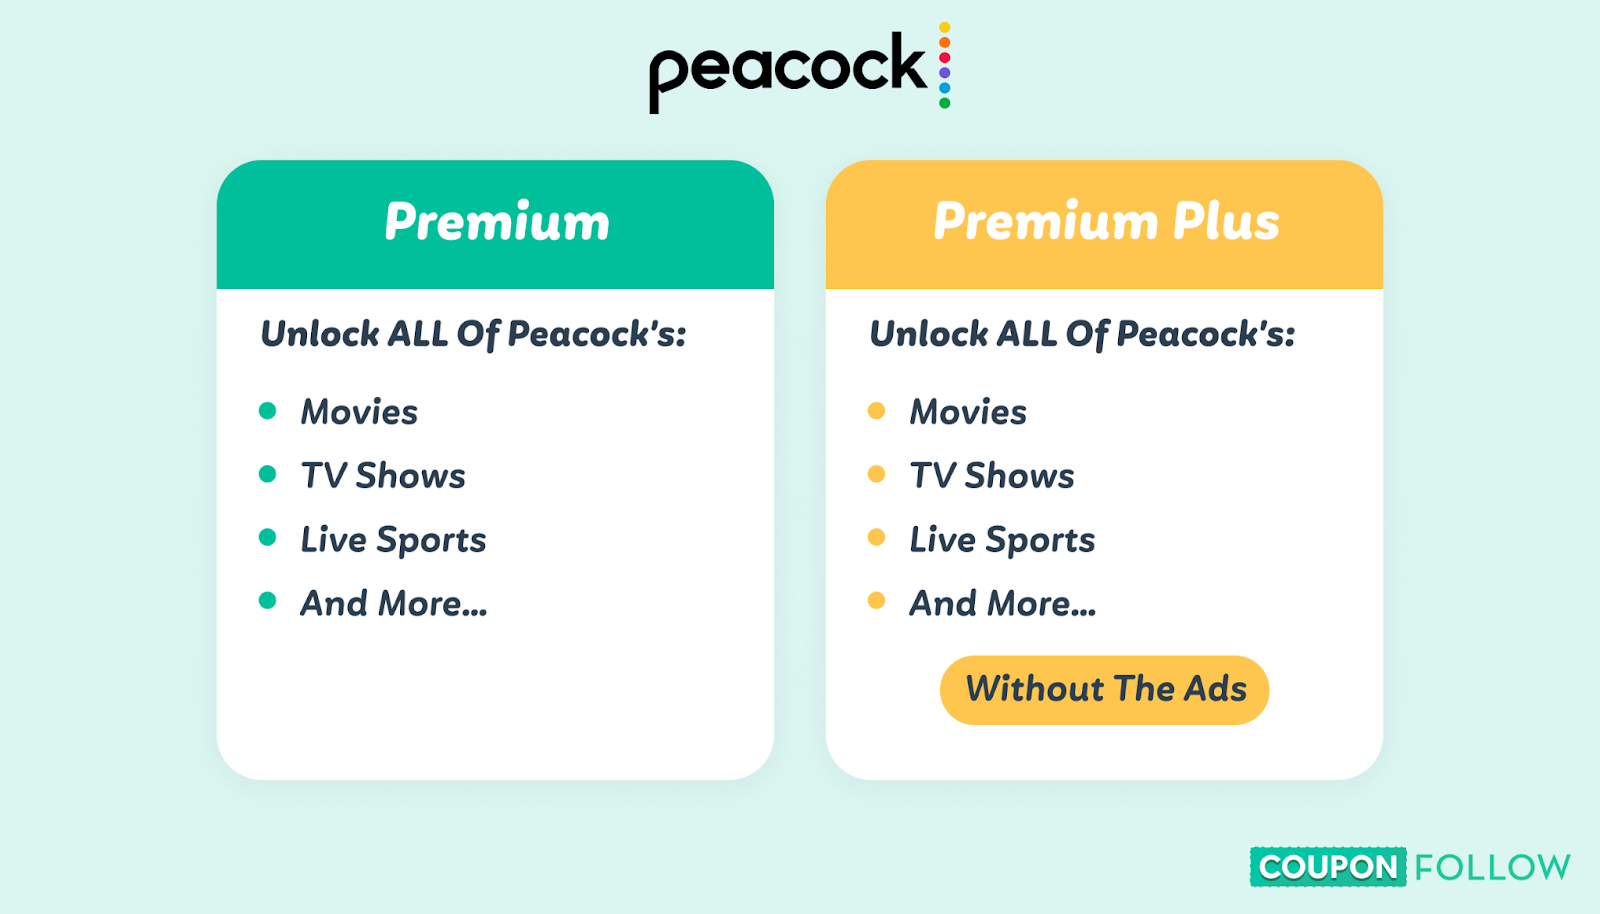  image showing the difference between peacock premium and peacock premium plus